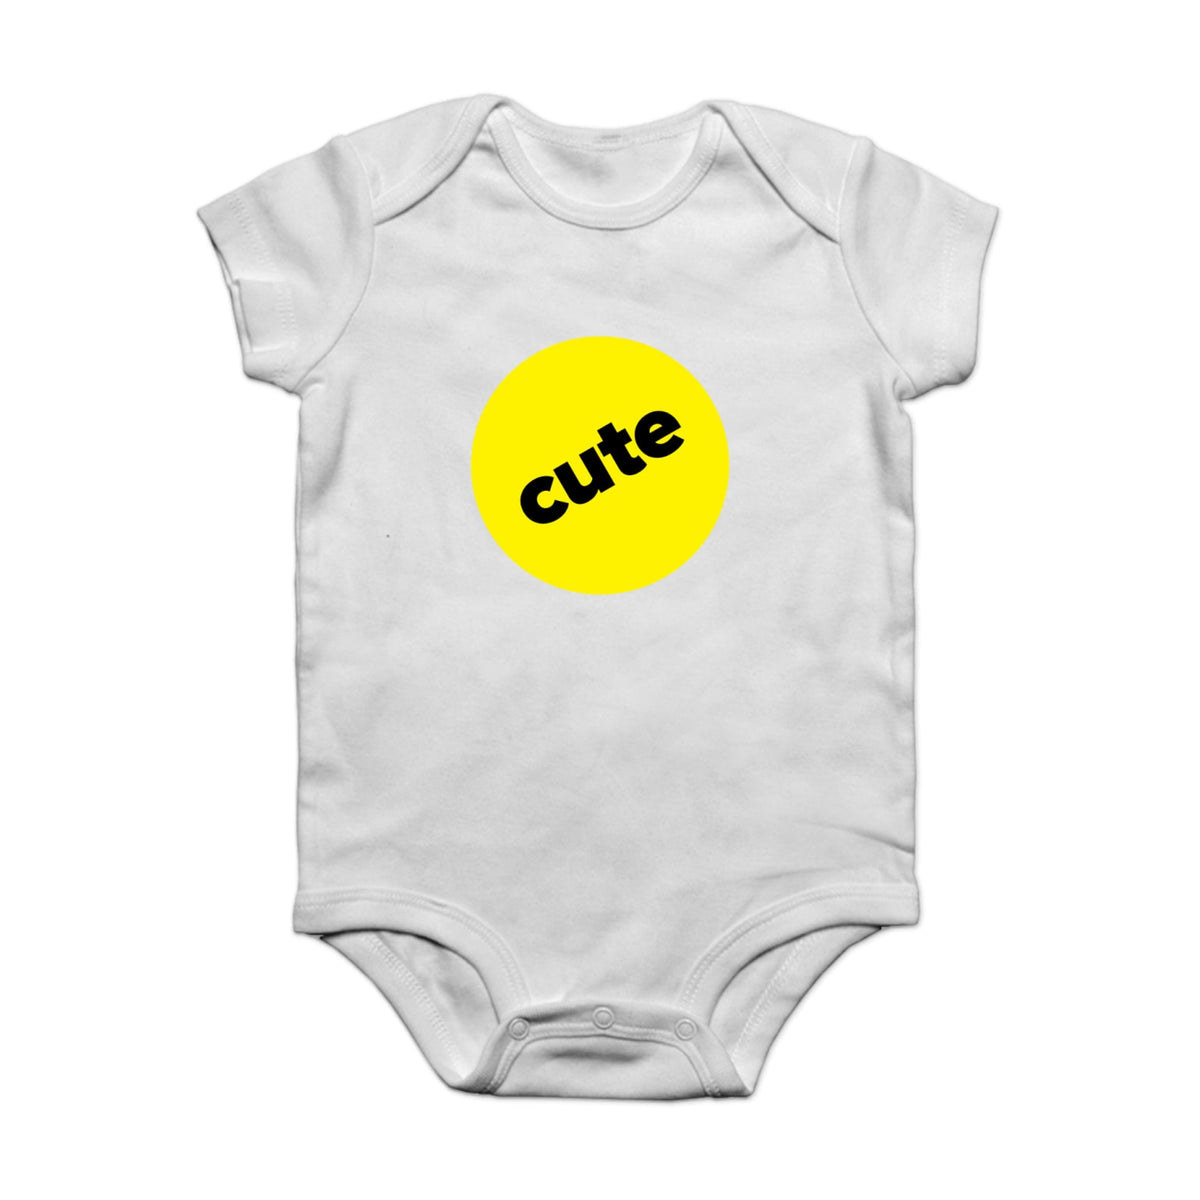 the white onesie with a yellow &#x27;cute&#x27; badge